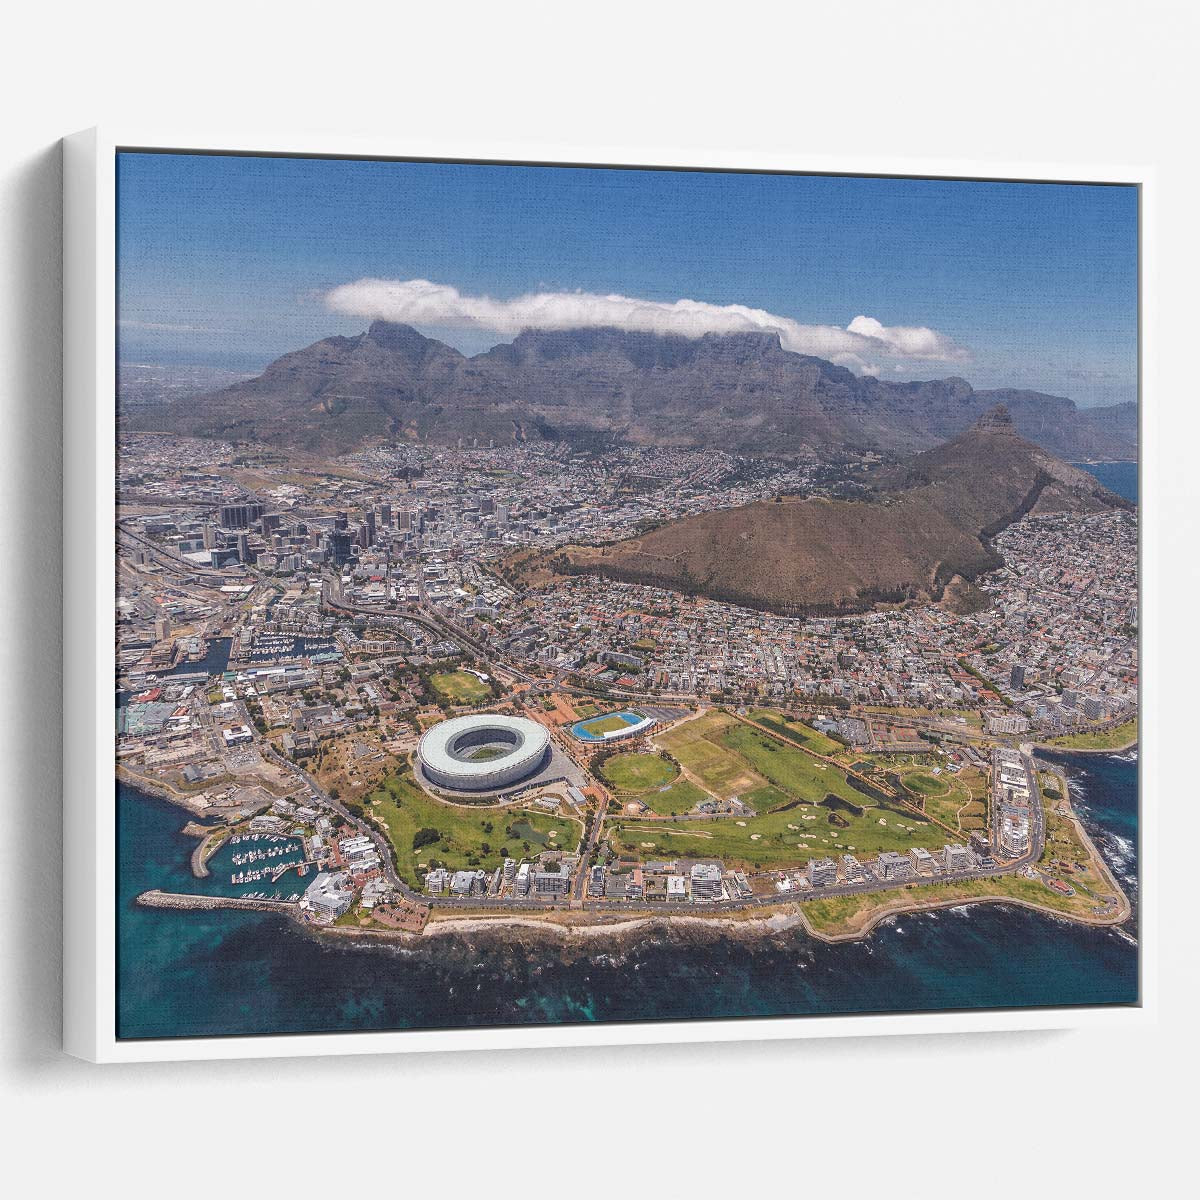 Cape Town Aerial View Urban Landscape Wall Art by Luxuriance Designs. Made in USA.